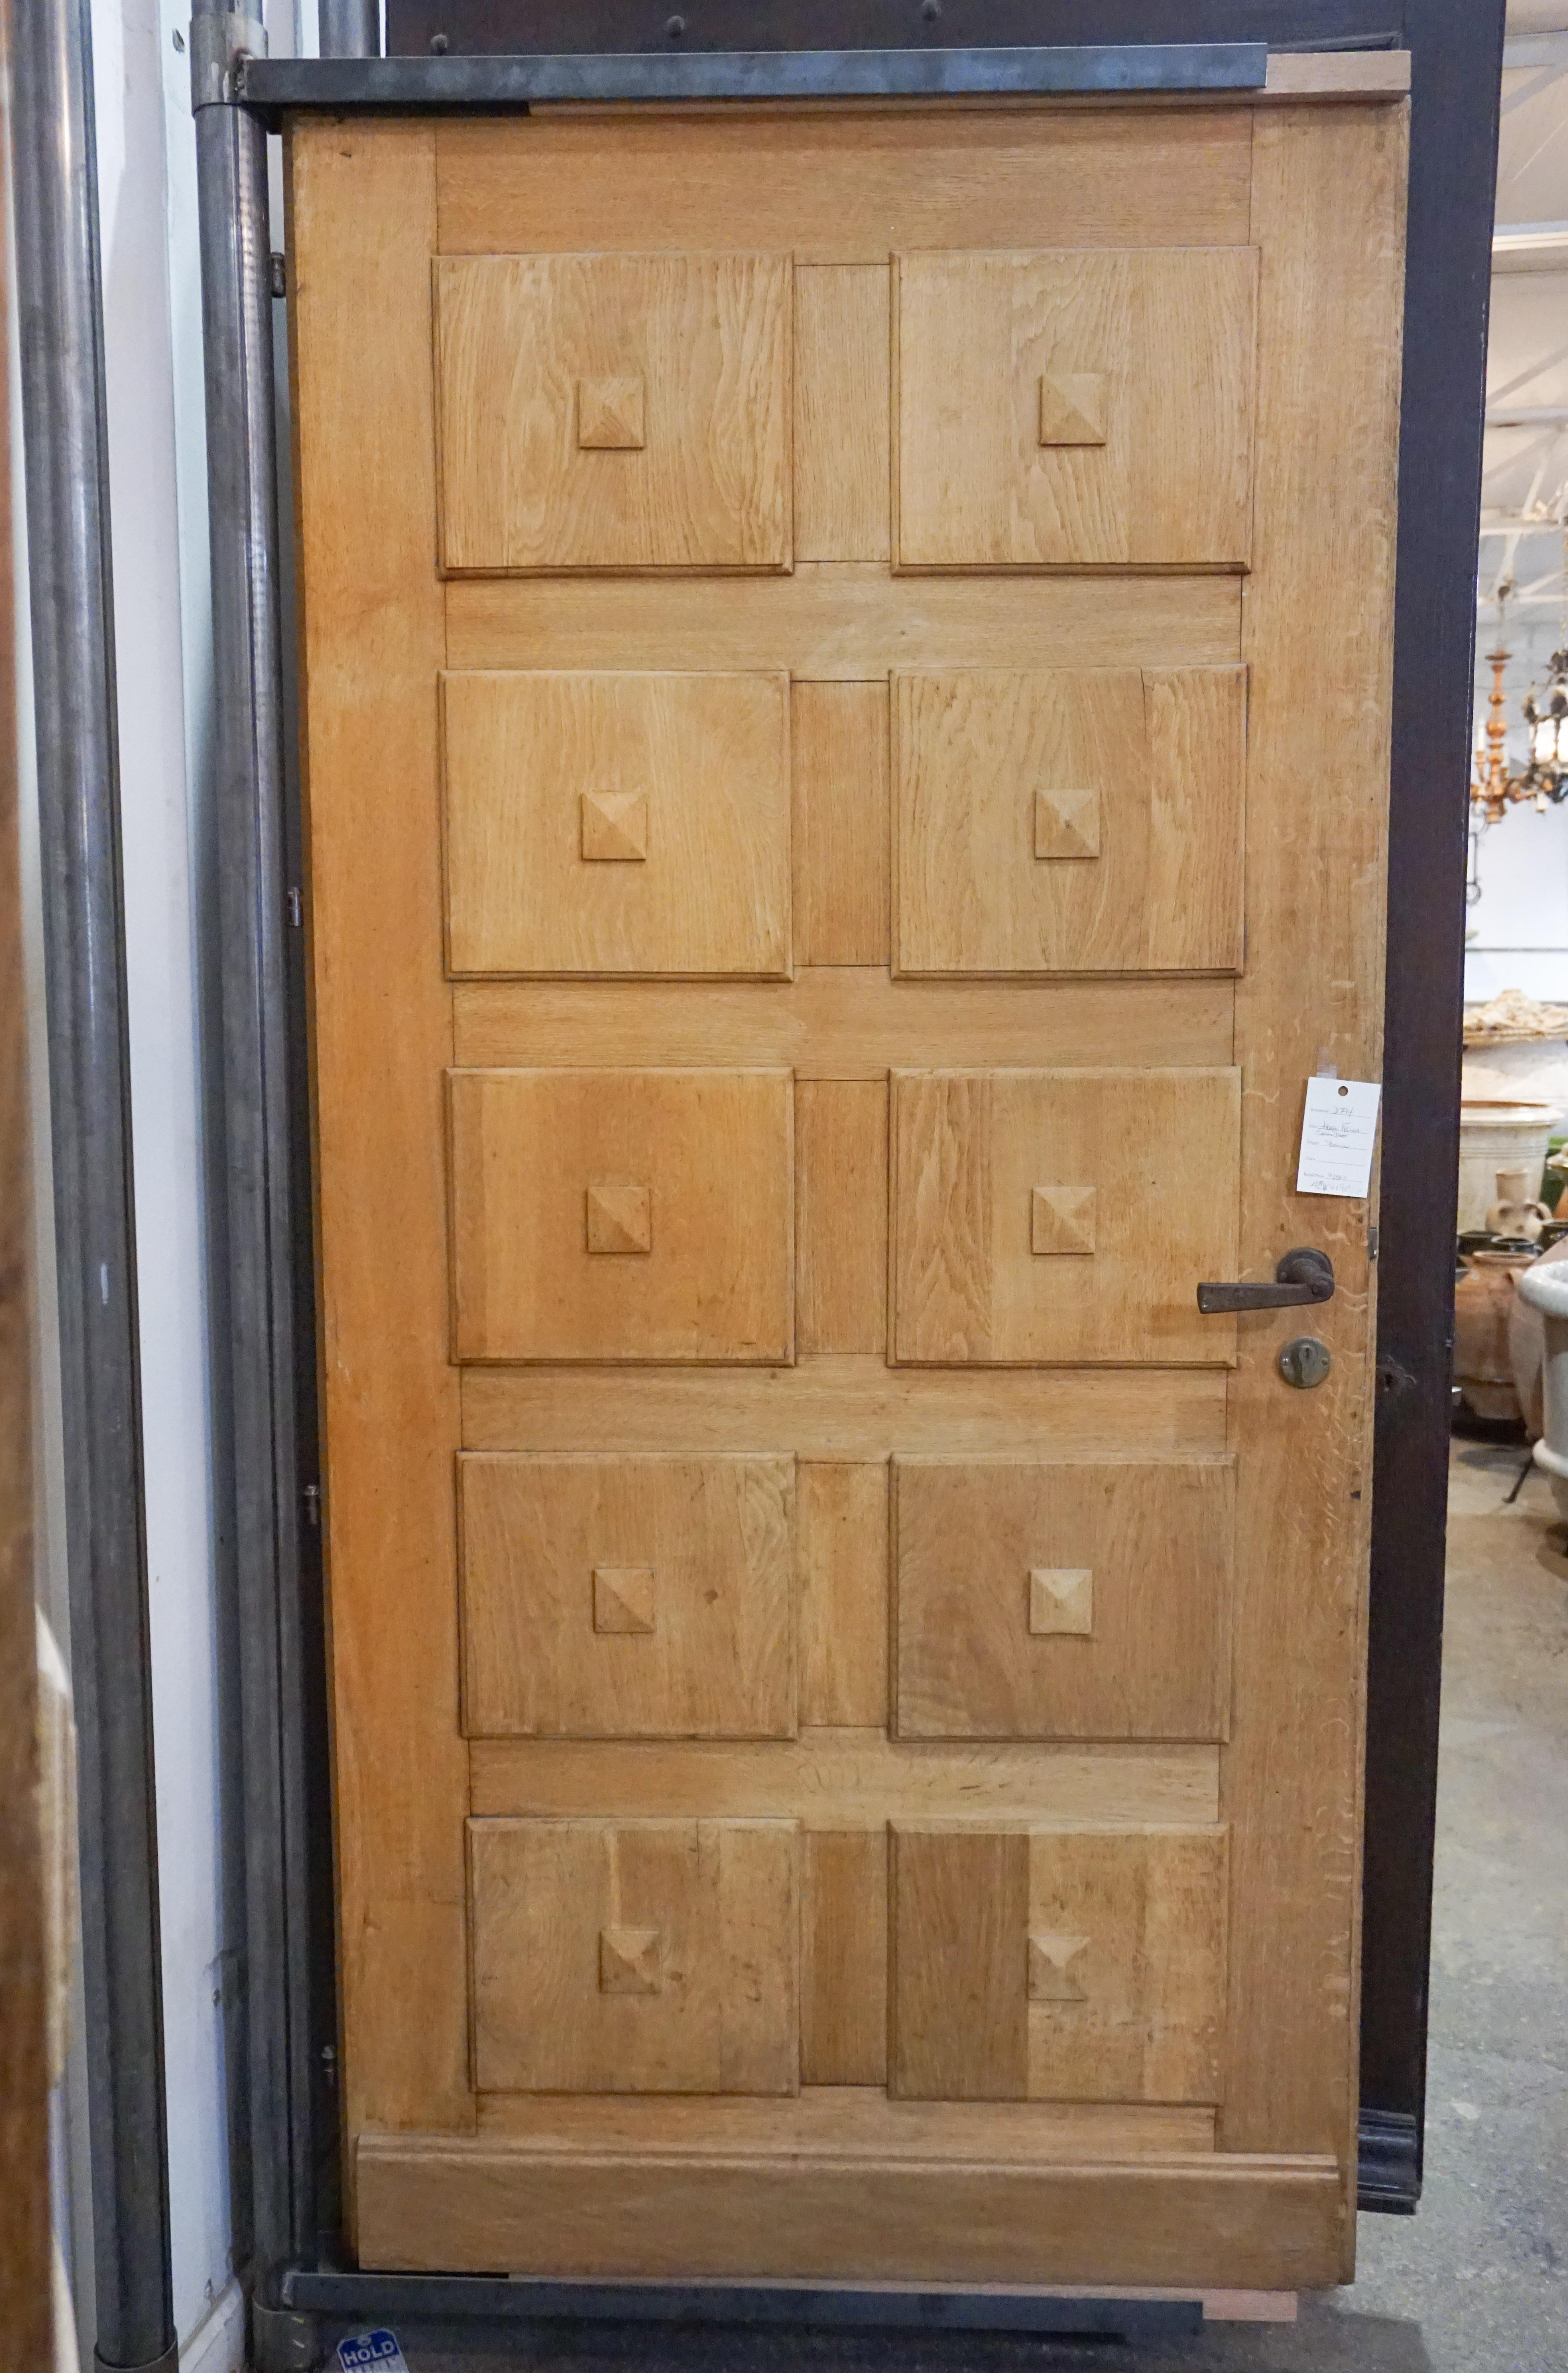 Antique French carved door.

Measurements: 42.75